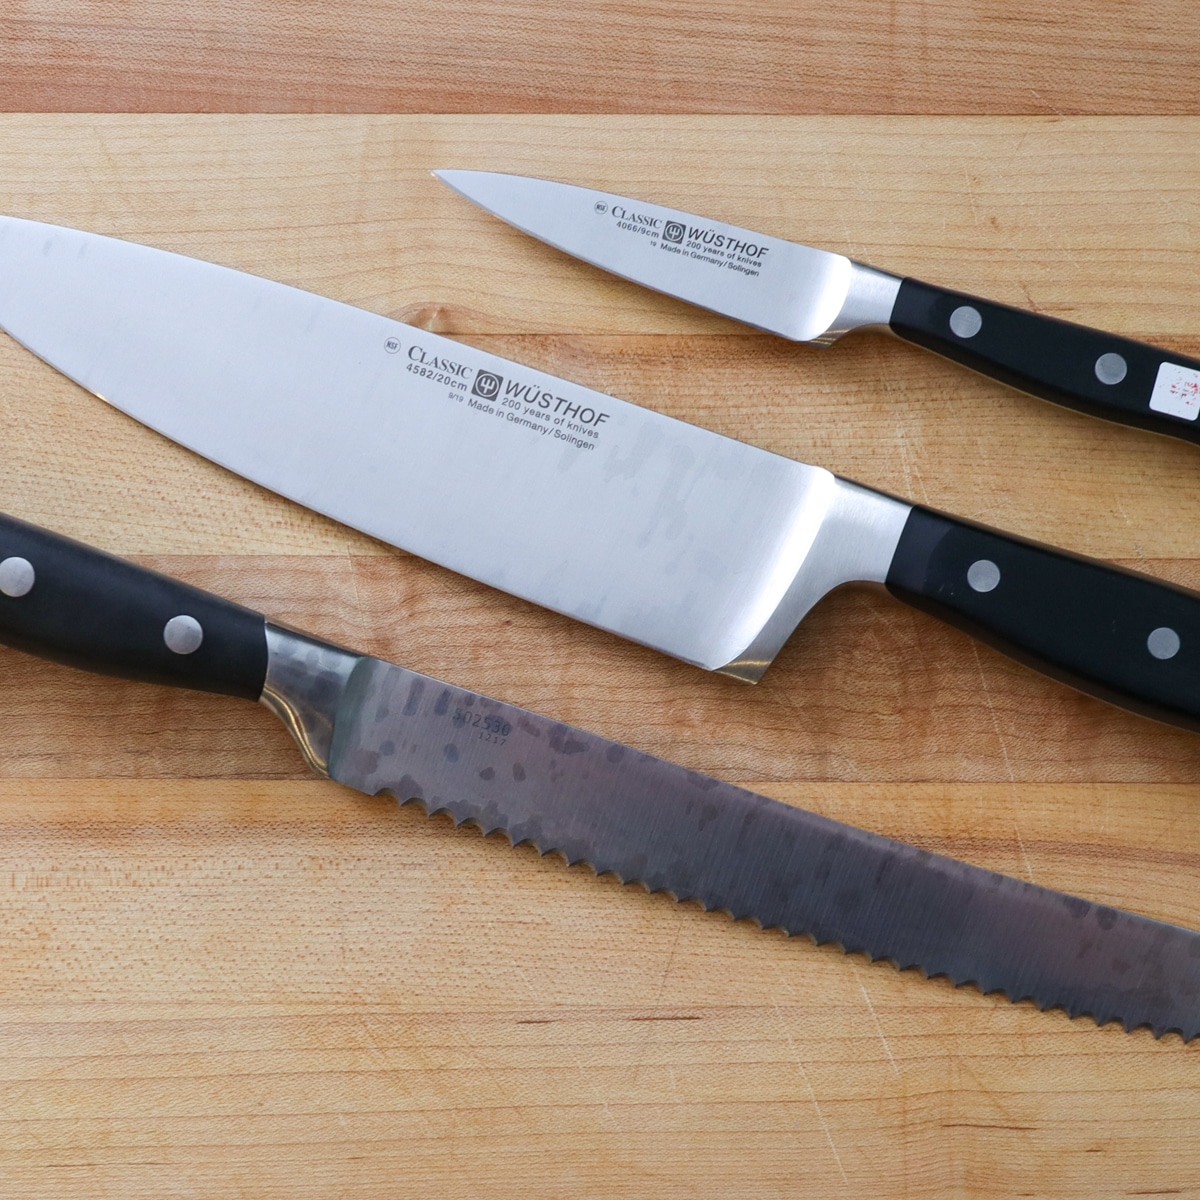 A chef knife, paring knife, and a bread knife on a cutting board.